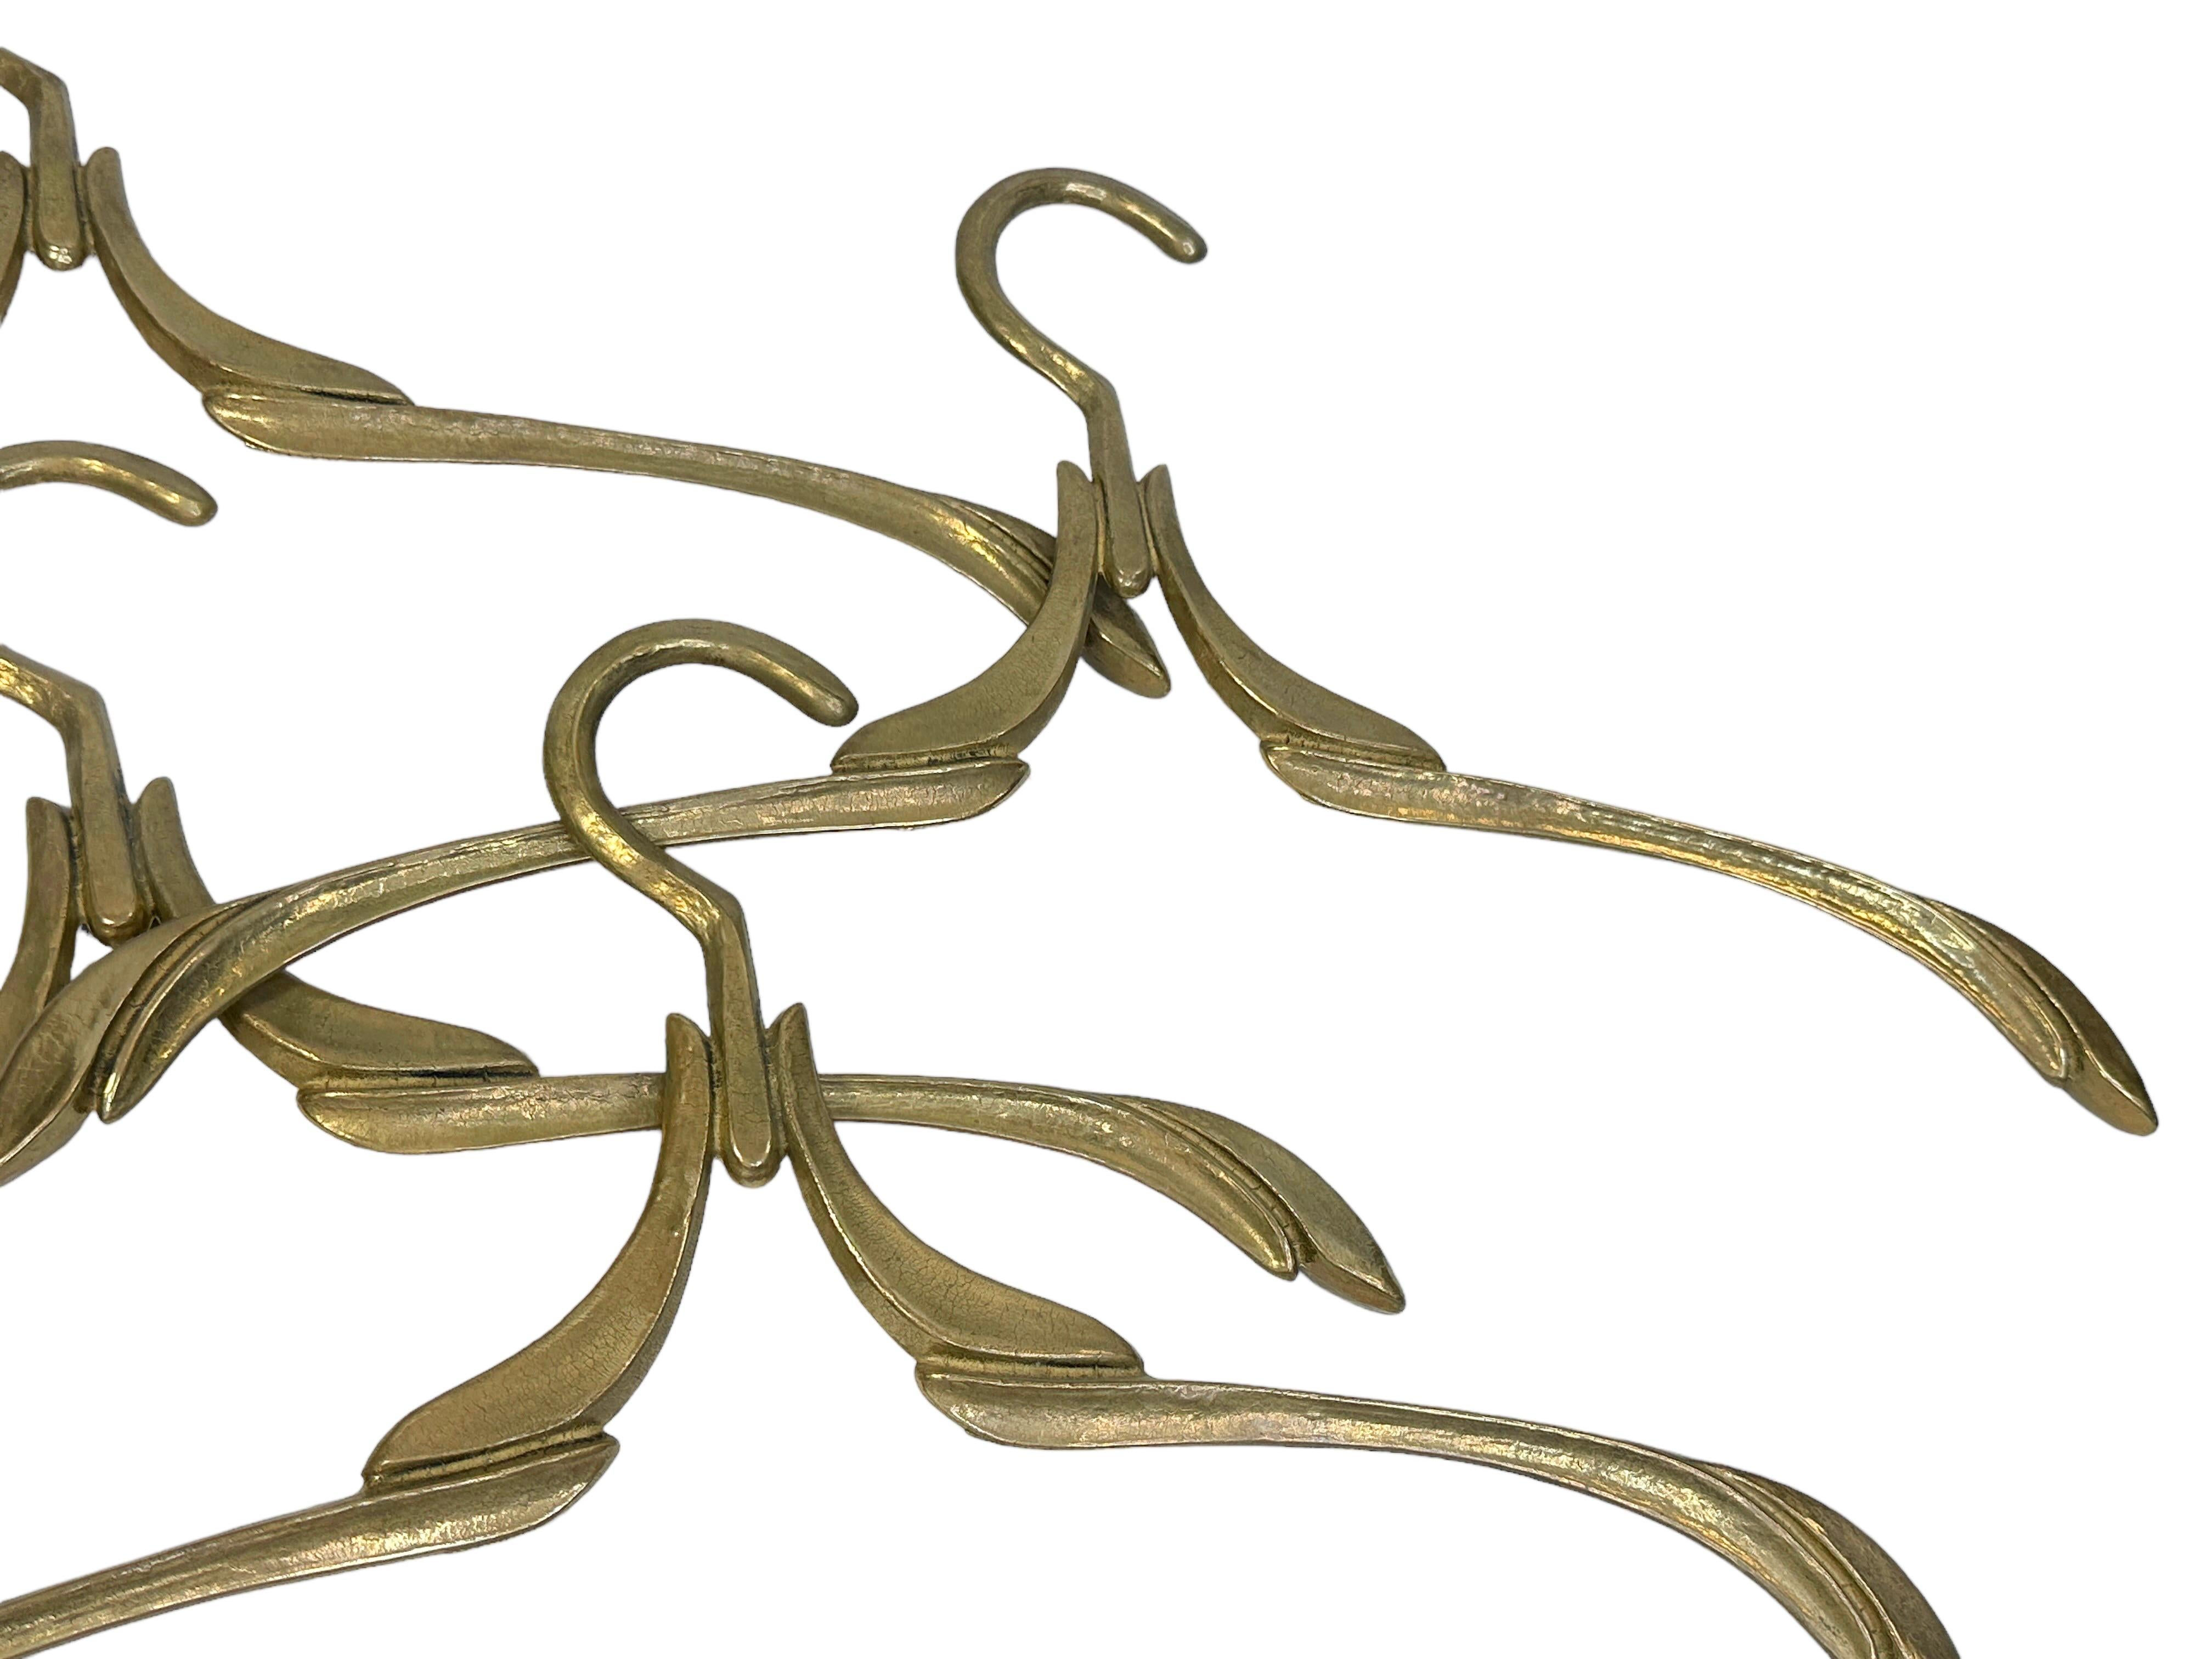 Set of Four Coat Hangers, Art Nouveau Style Solid Brass, Vintage 1950s to 1960s  In Good Condition For Sale In Nuernberg, DE